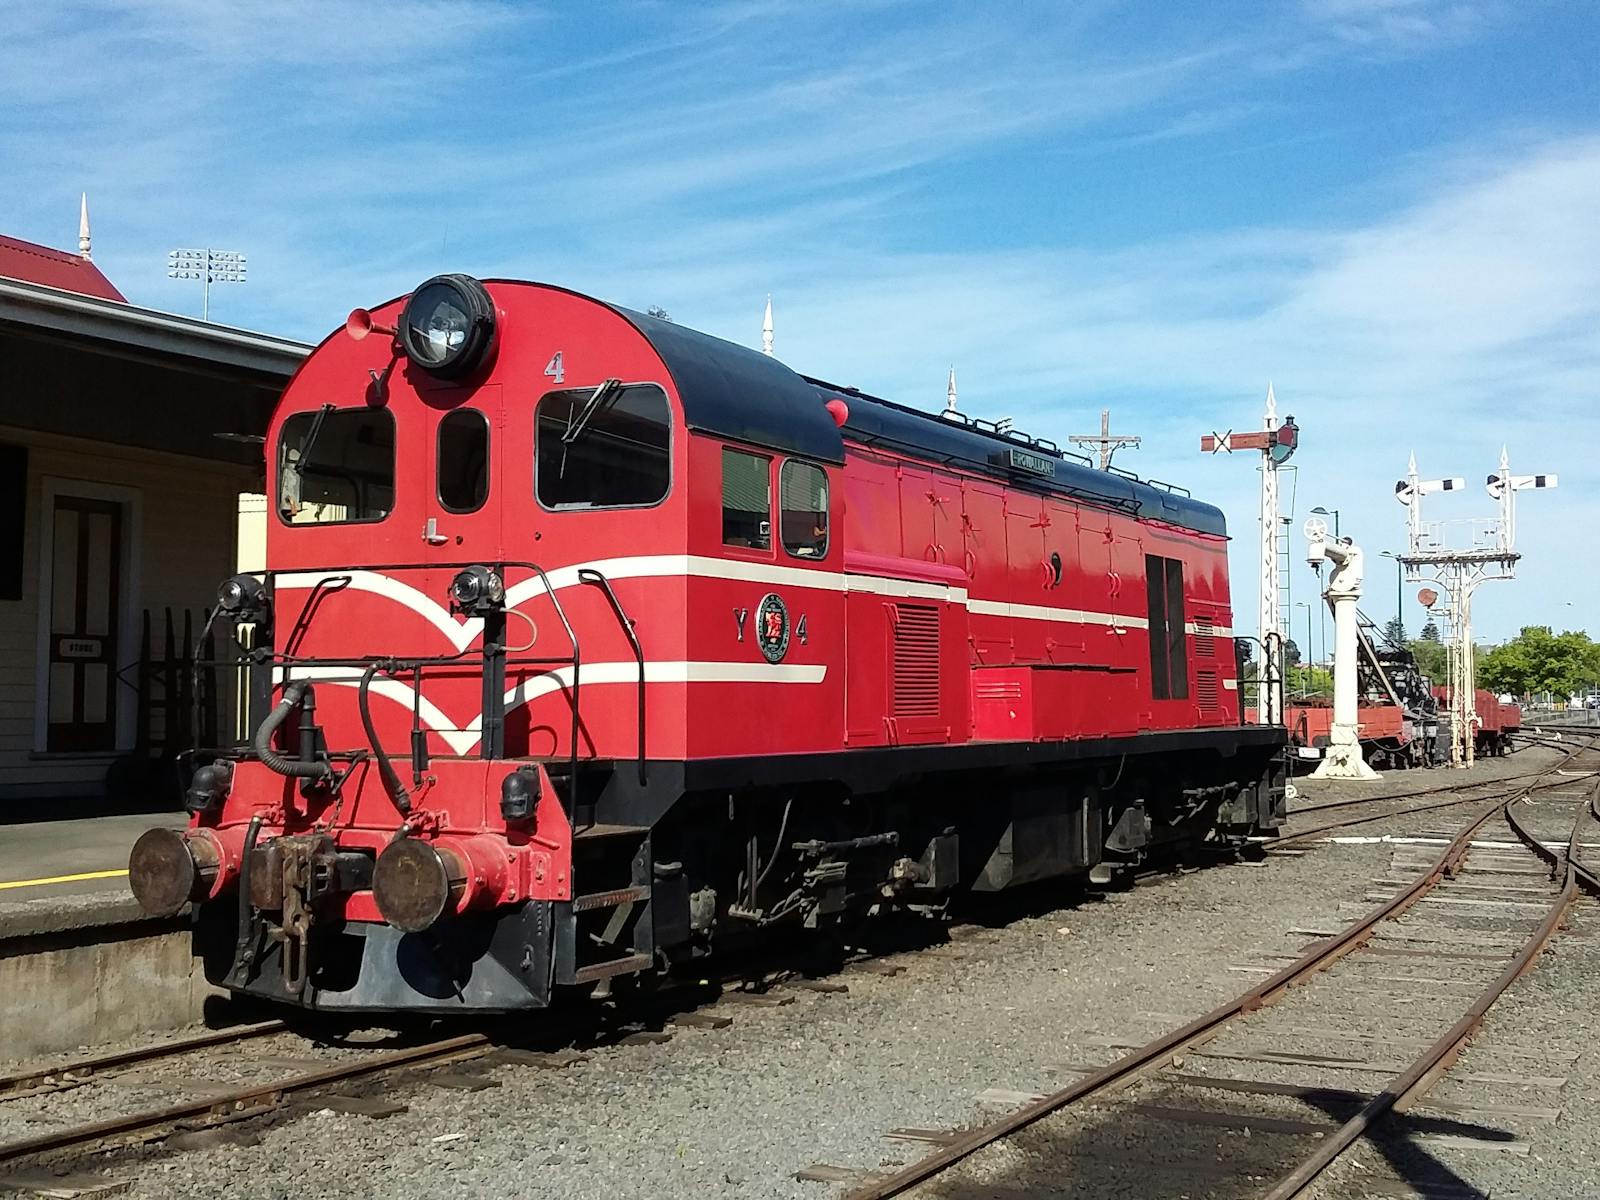 Built in Launceston, a fully operational locomotive that you will find in the Roundhouse